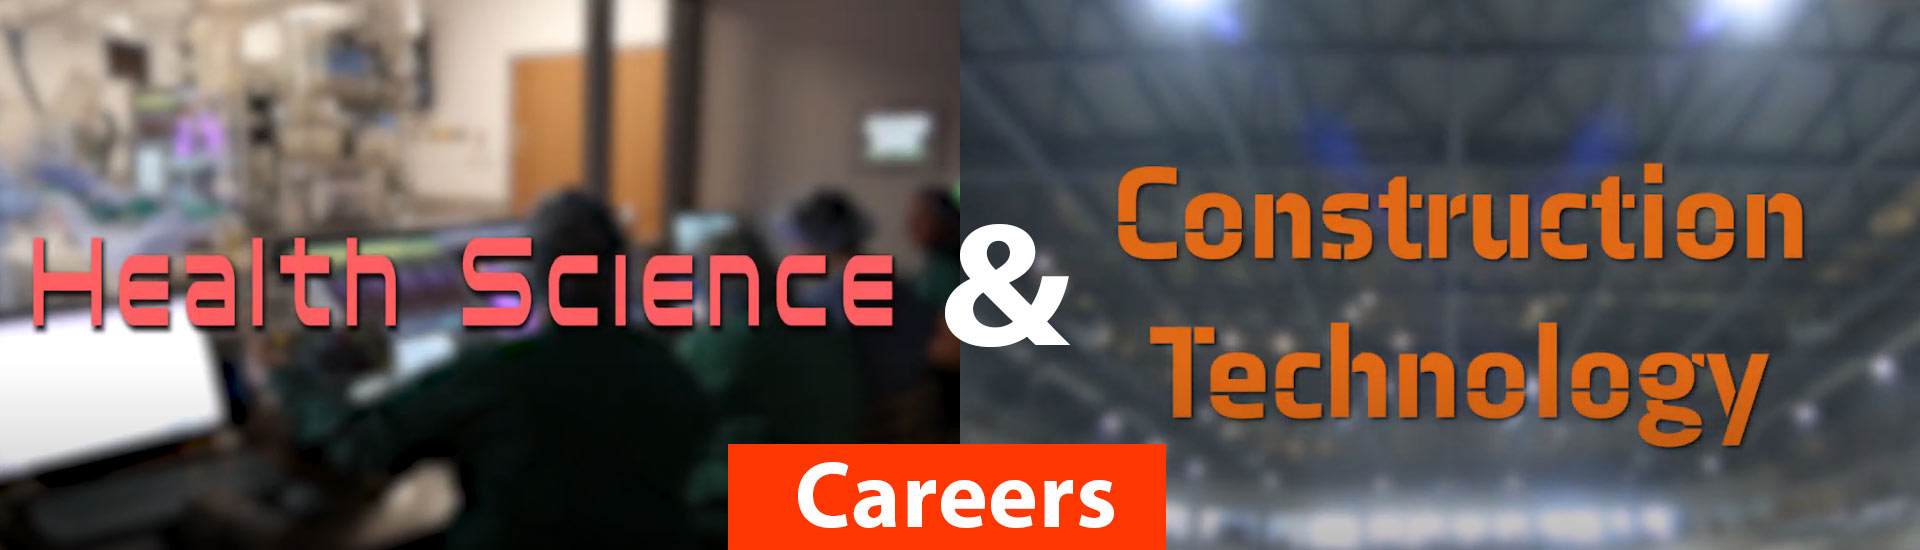 Health Science Careers and Construction Technology Careers